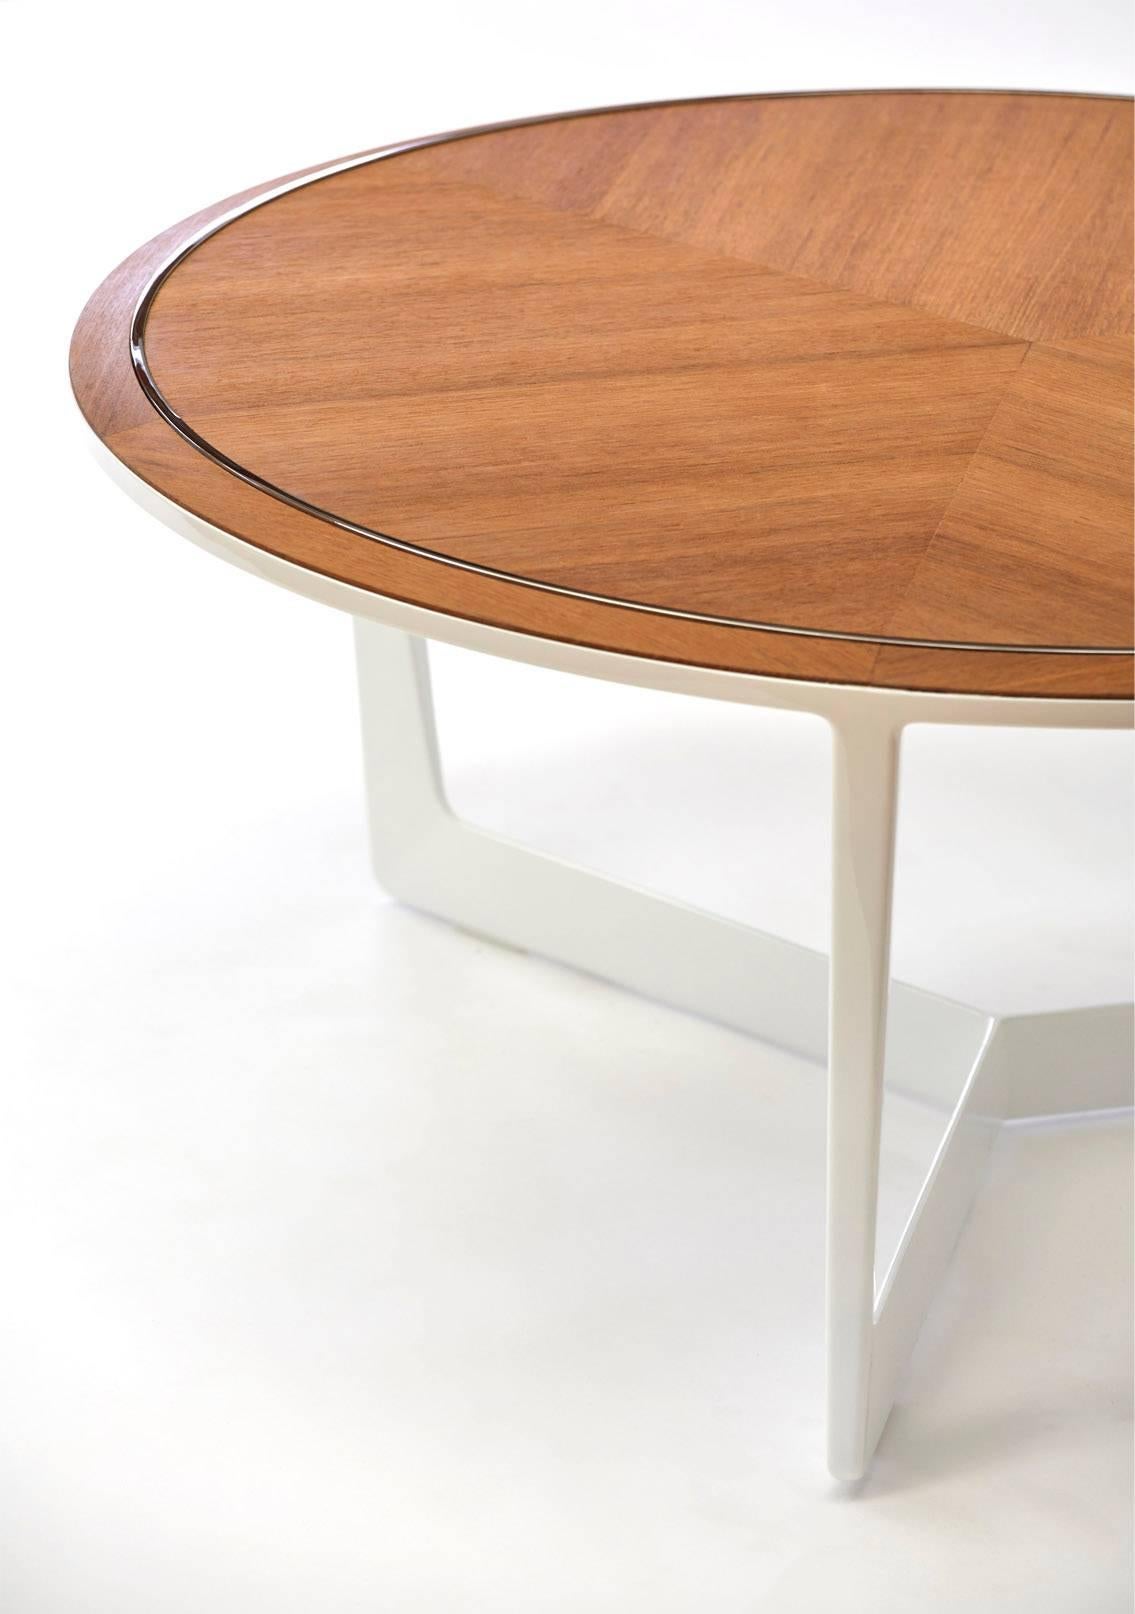 The Gosling Coffee Table was designed for exterior use. This piece has a carbon fibre frame with a teak surface and stainless steel inlay. 
 
The Gosling Marine collection is bespoke. Quoted prices include a choice of wood, polished or brushed